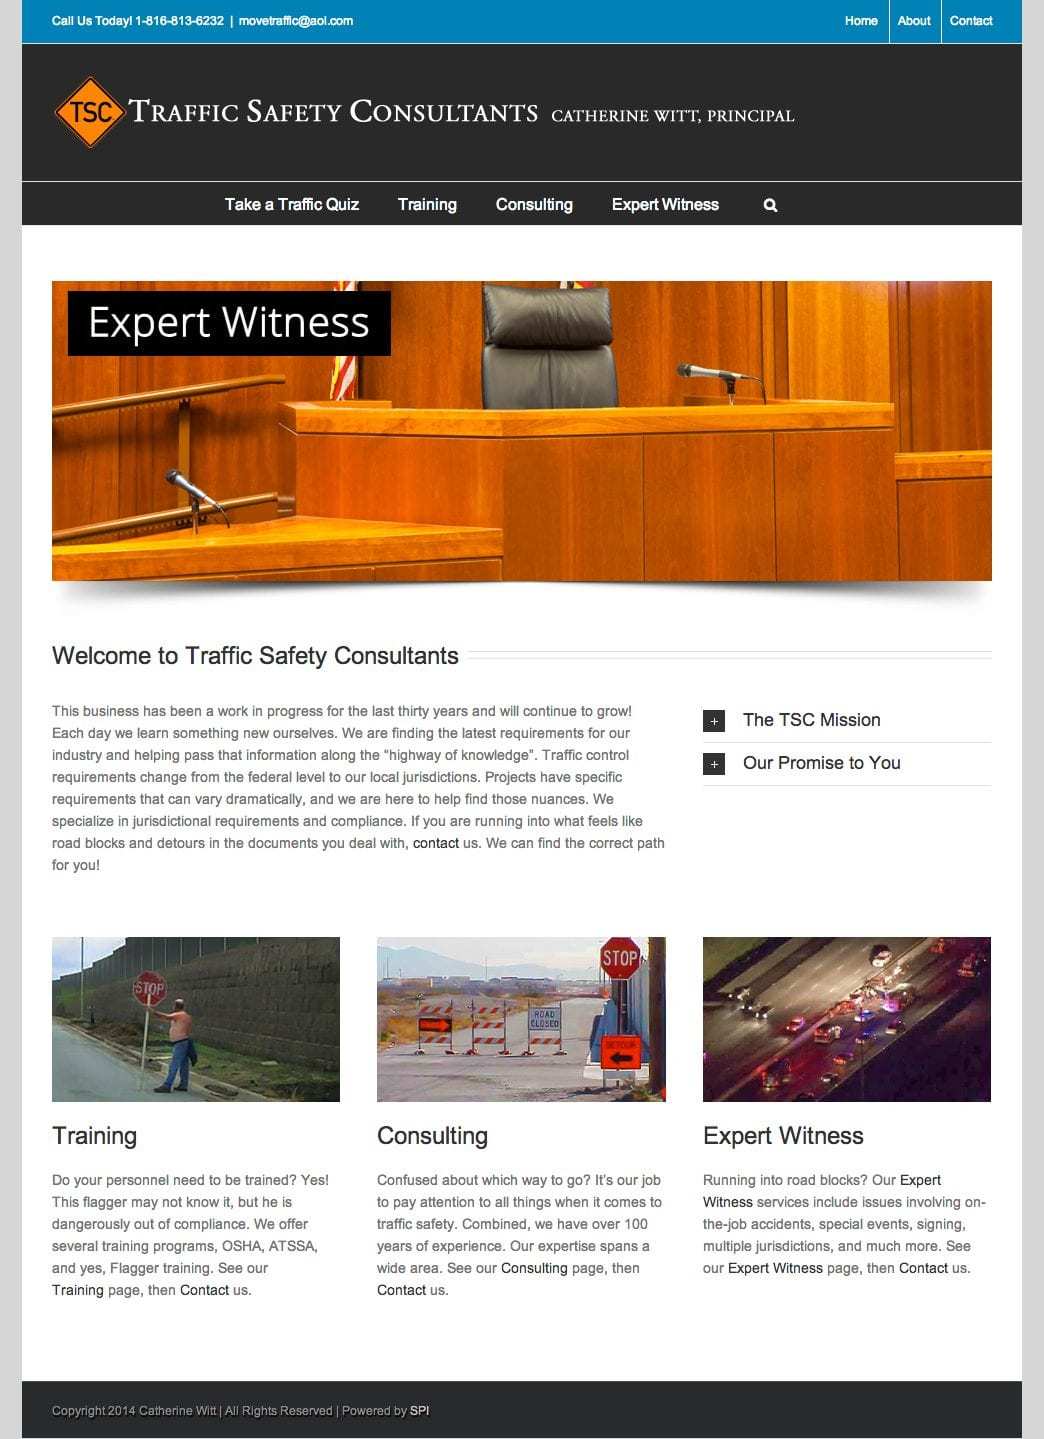 Traffic Safety Consultants homepage